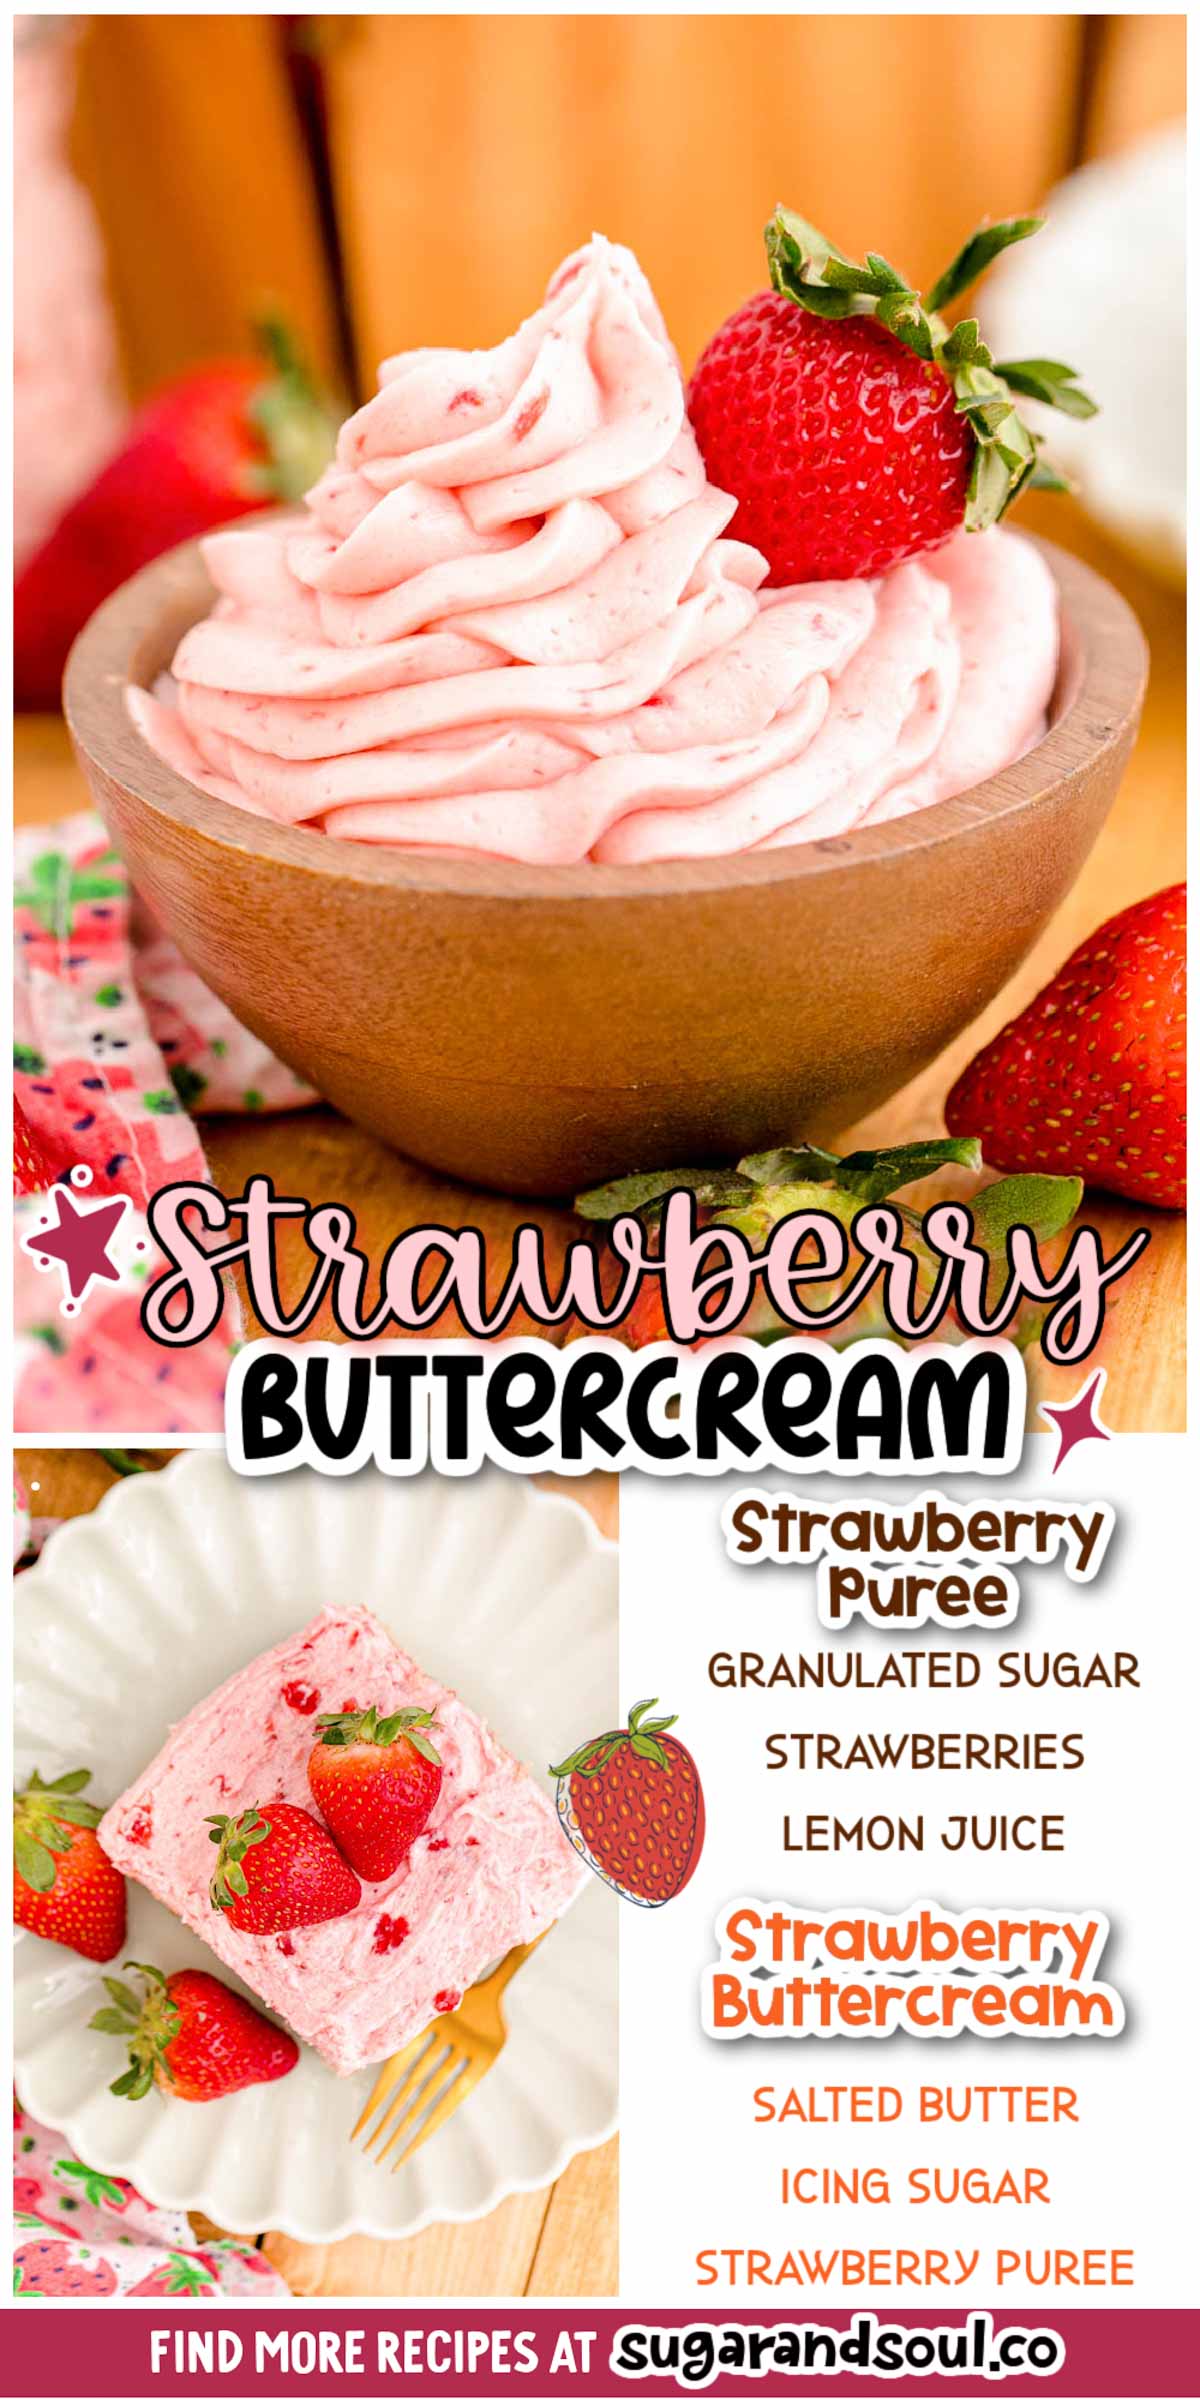 Strawberry Buttercream Frosting uses 5 simple ingredients to create a light, creamy frosting that's perfect for cupcakes, cakes, and more! Made with real strawberries for the best flavor! via @sugarandsoulco